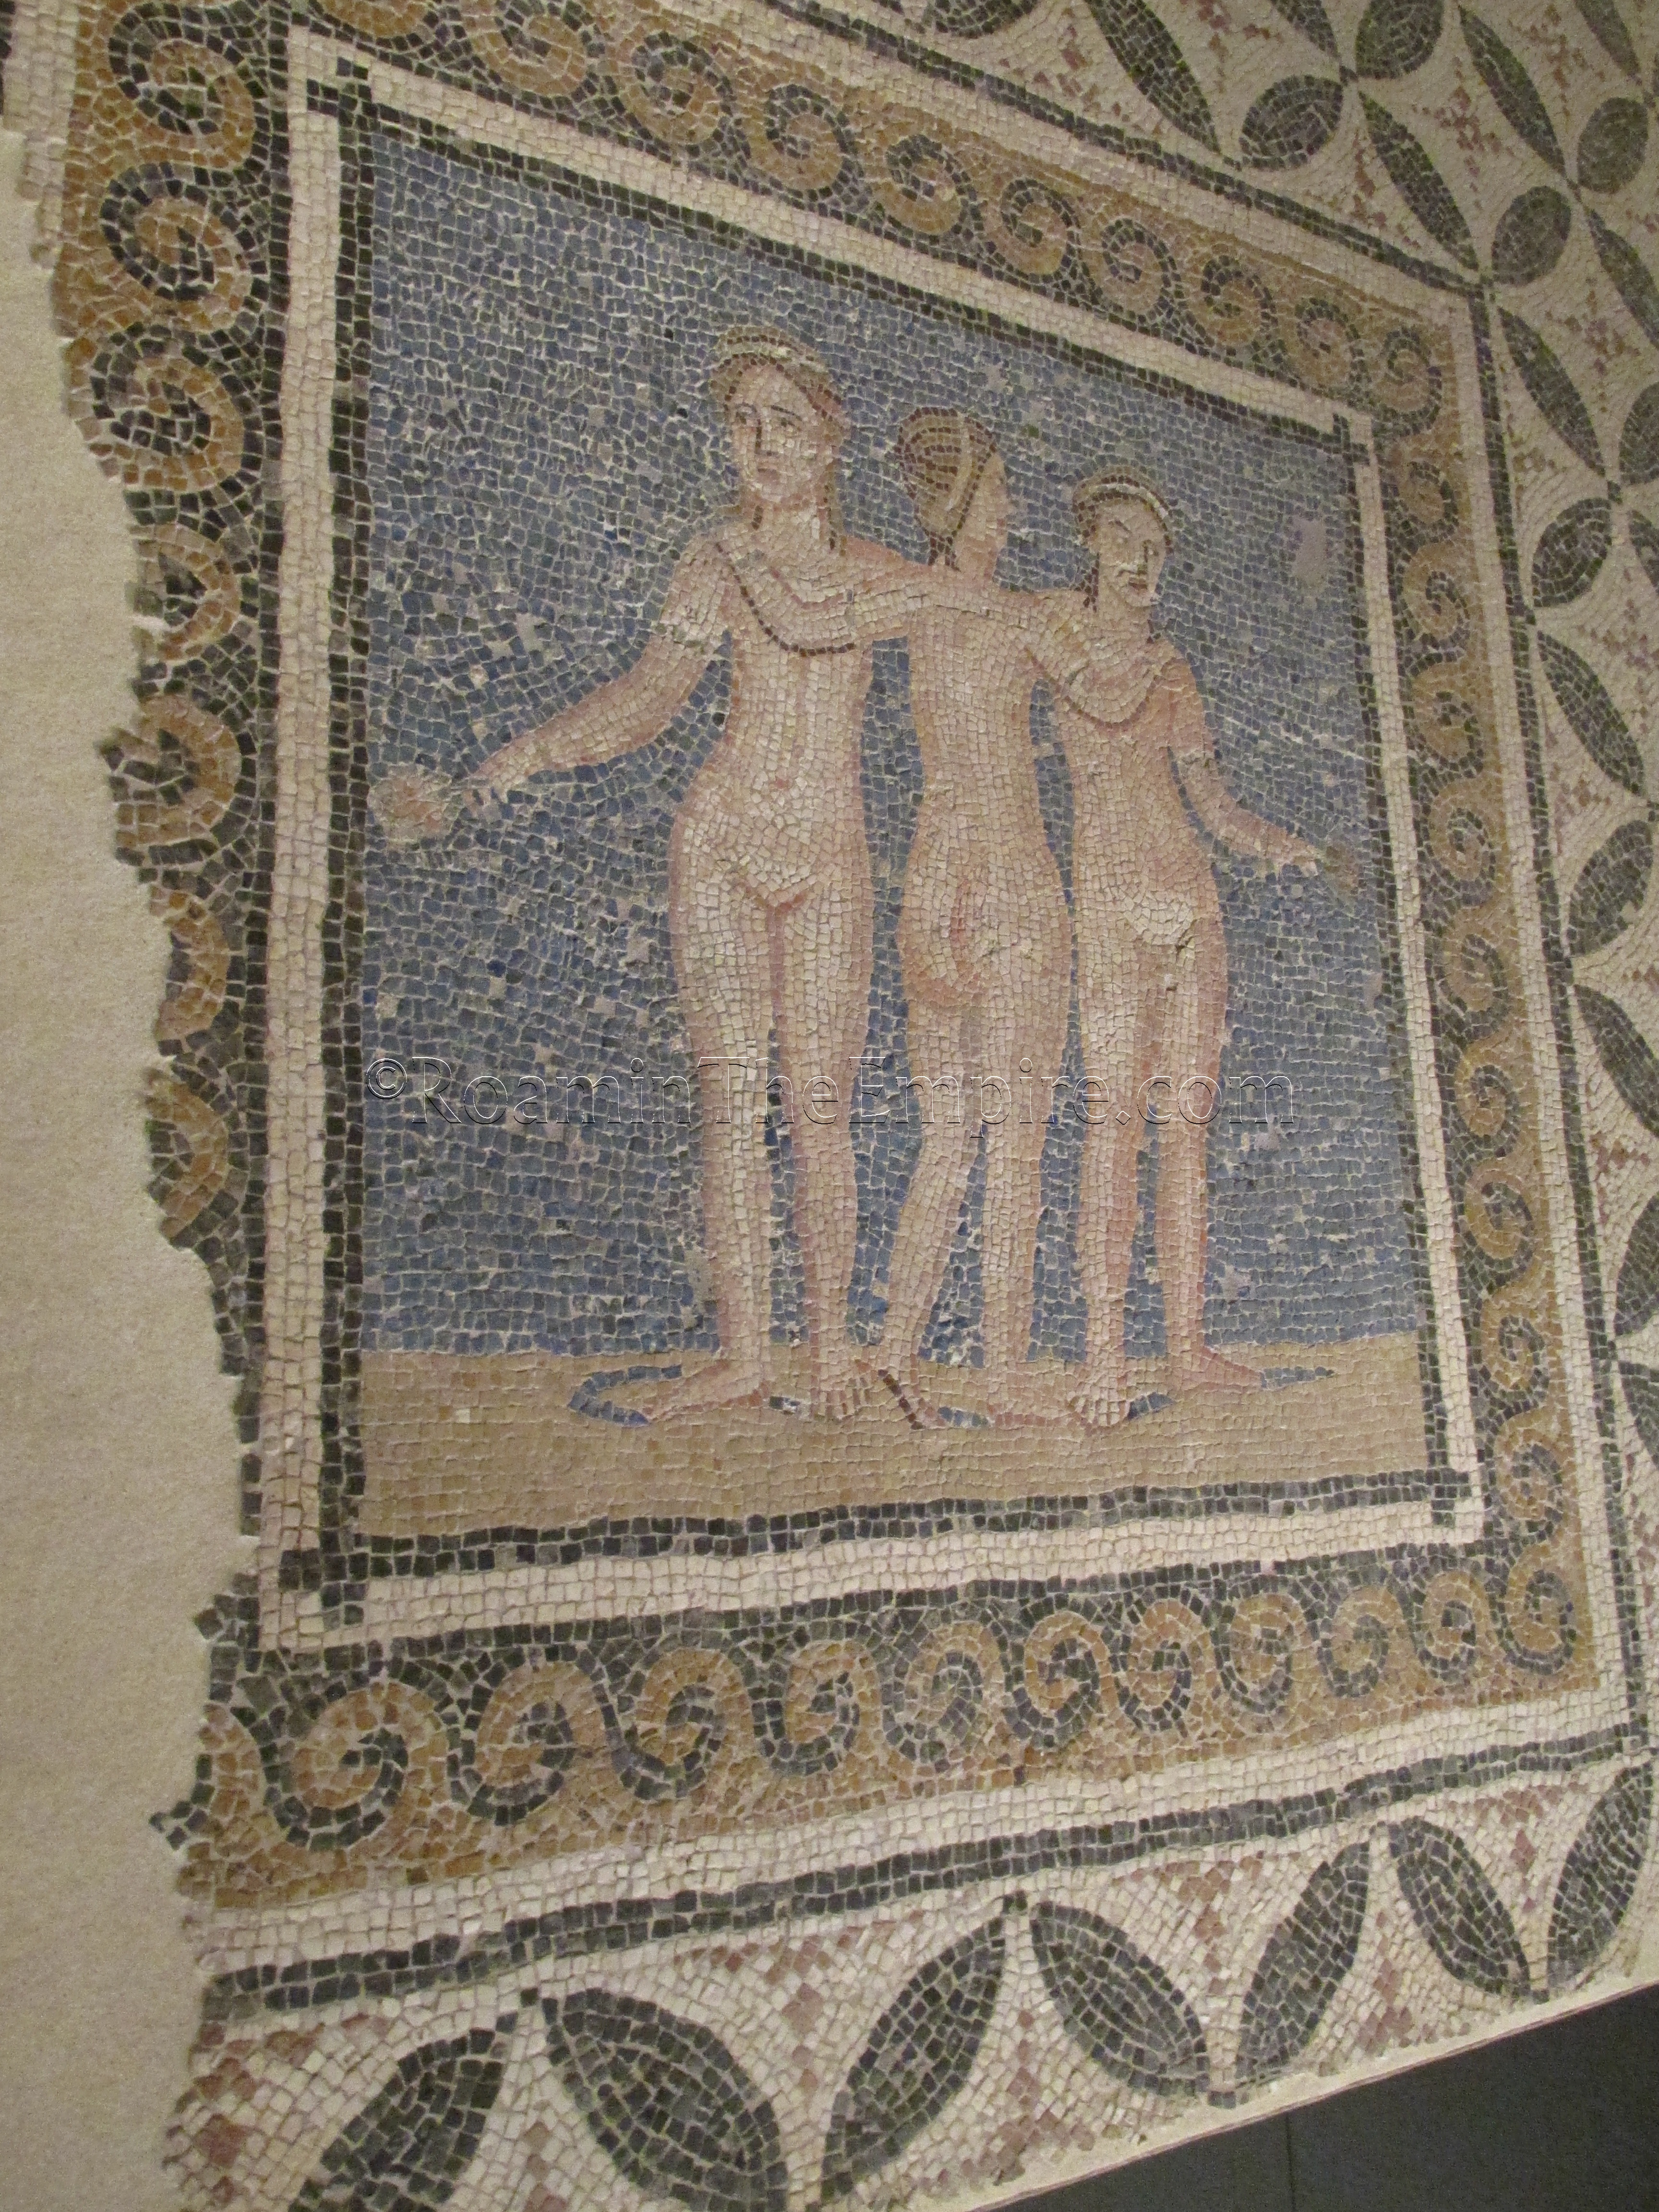 Three Graces mosaic from a house in the western part of Barcino.